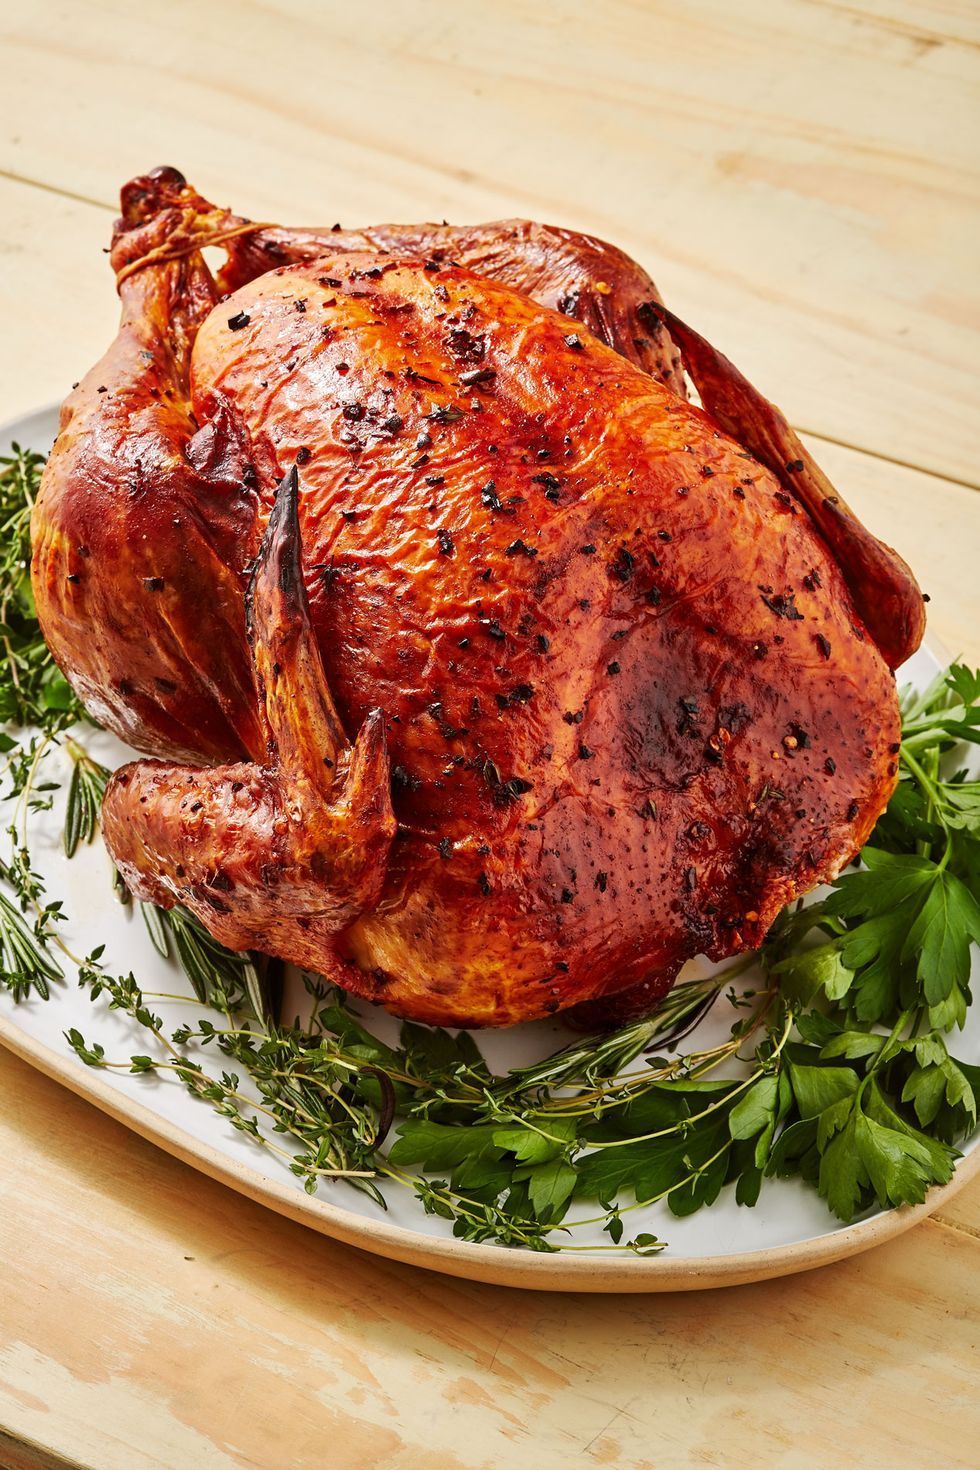 Christmas Turkey Recipe - How To Cook Your Christmas Turkey